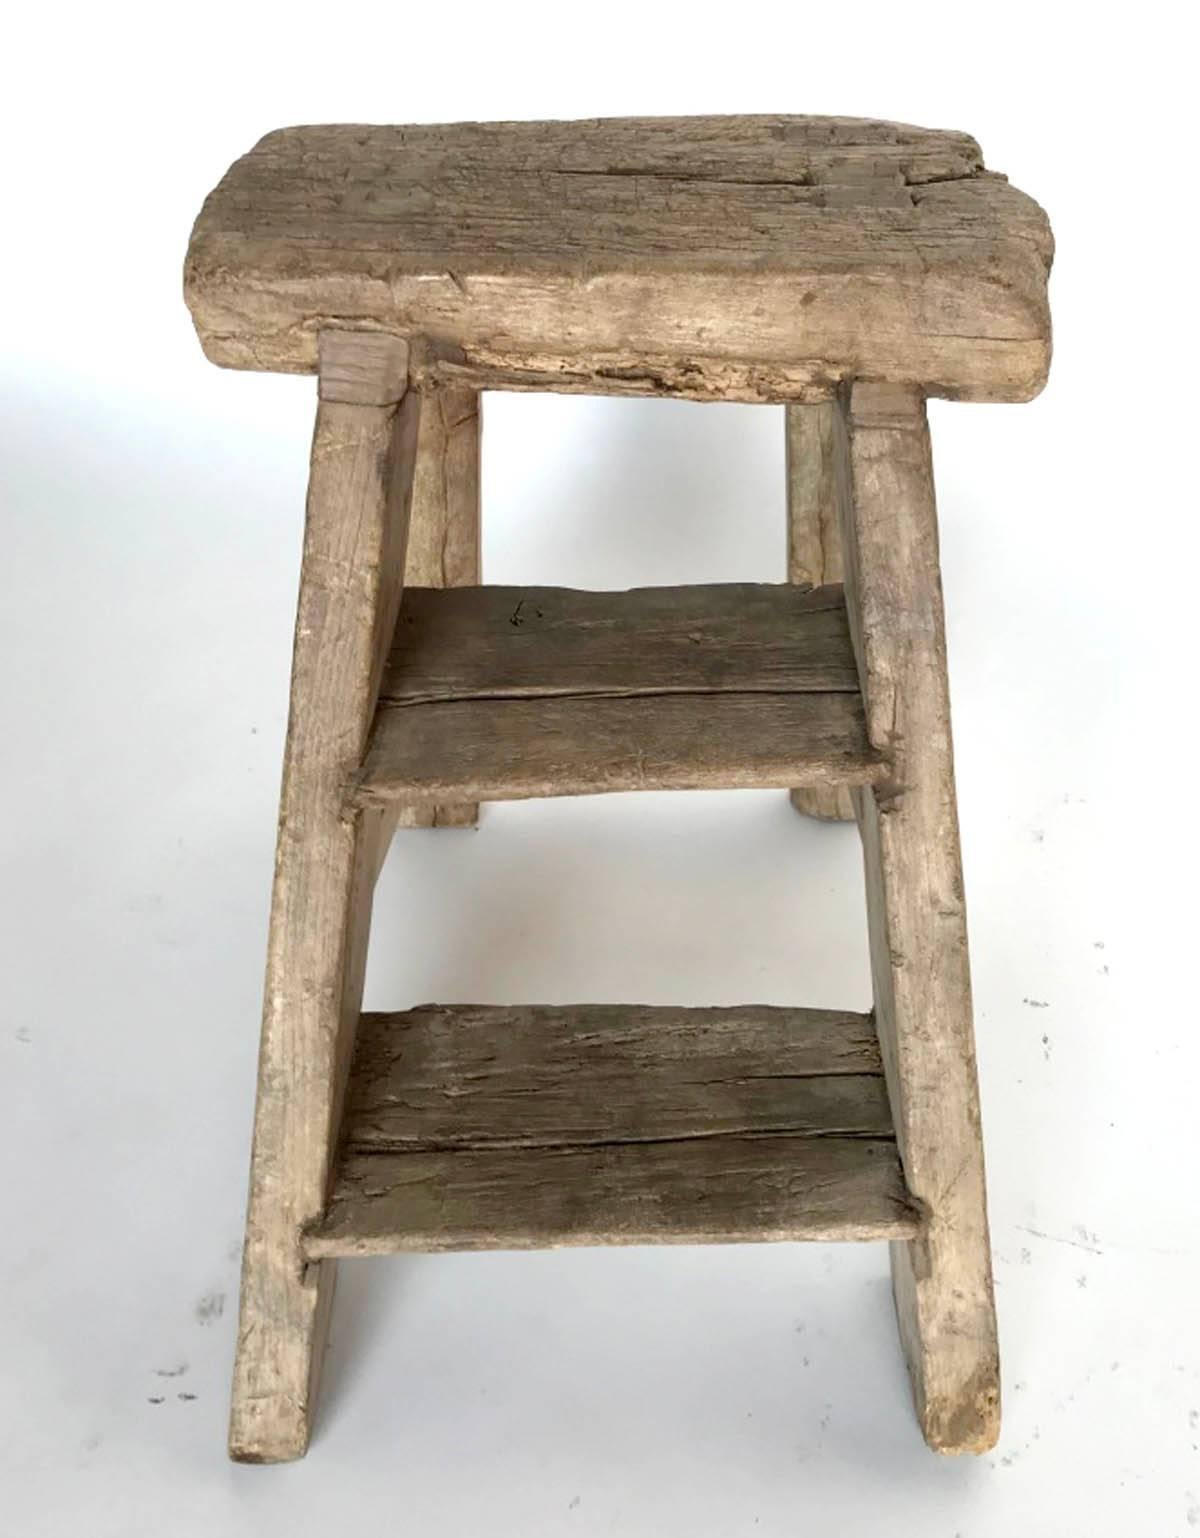 Wonderfully rustic, old Elm wood step stool or ladder. Mortise and tenon construction. Sturdy and functional, naturally worn, faded patina.